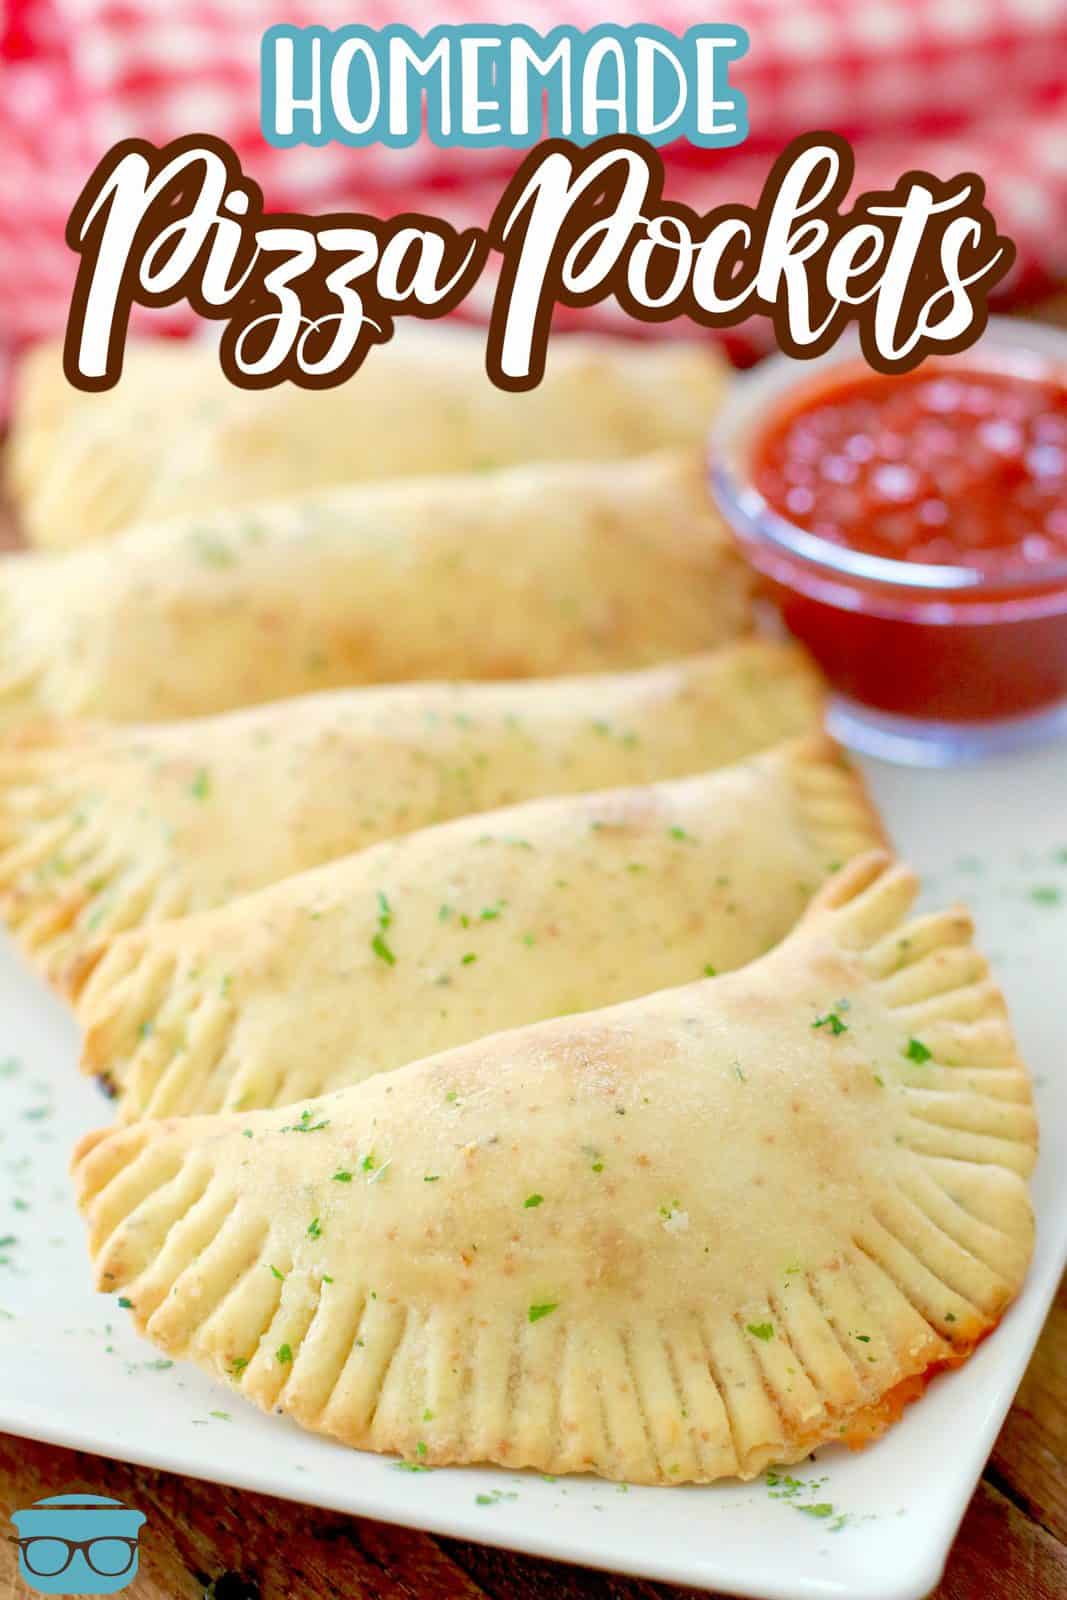 Homemade Pizza Pocket recipe. Hot pockets shown lined up on a white platter with a small bowl of pizza sauce.